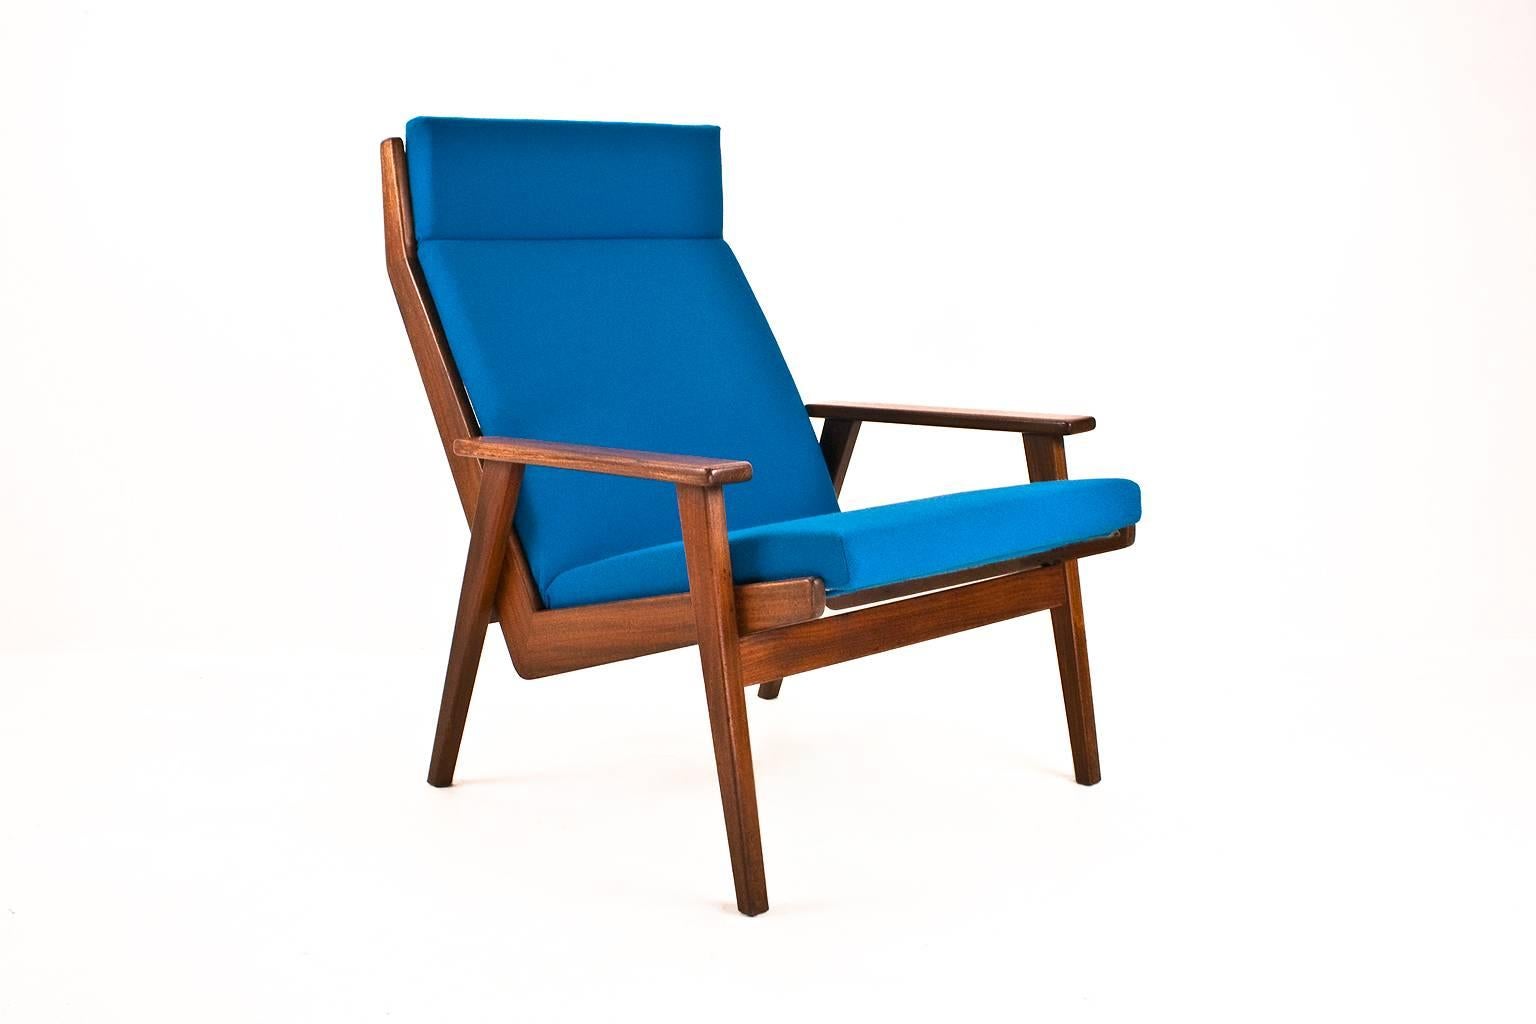 Original Rob Parry lotus lounge chair for Dutch furniture company Gelderland (collection 1950s-1960s) in wood with new blue upholstery (De Ploeg-Solid.) We have a set in stock, but can be sold separate.

The fabric, fillings and webbing is